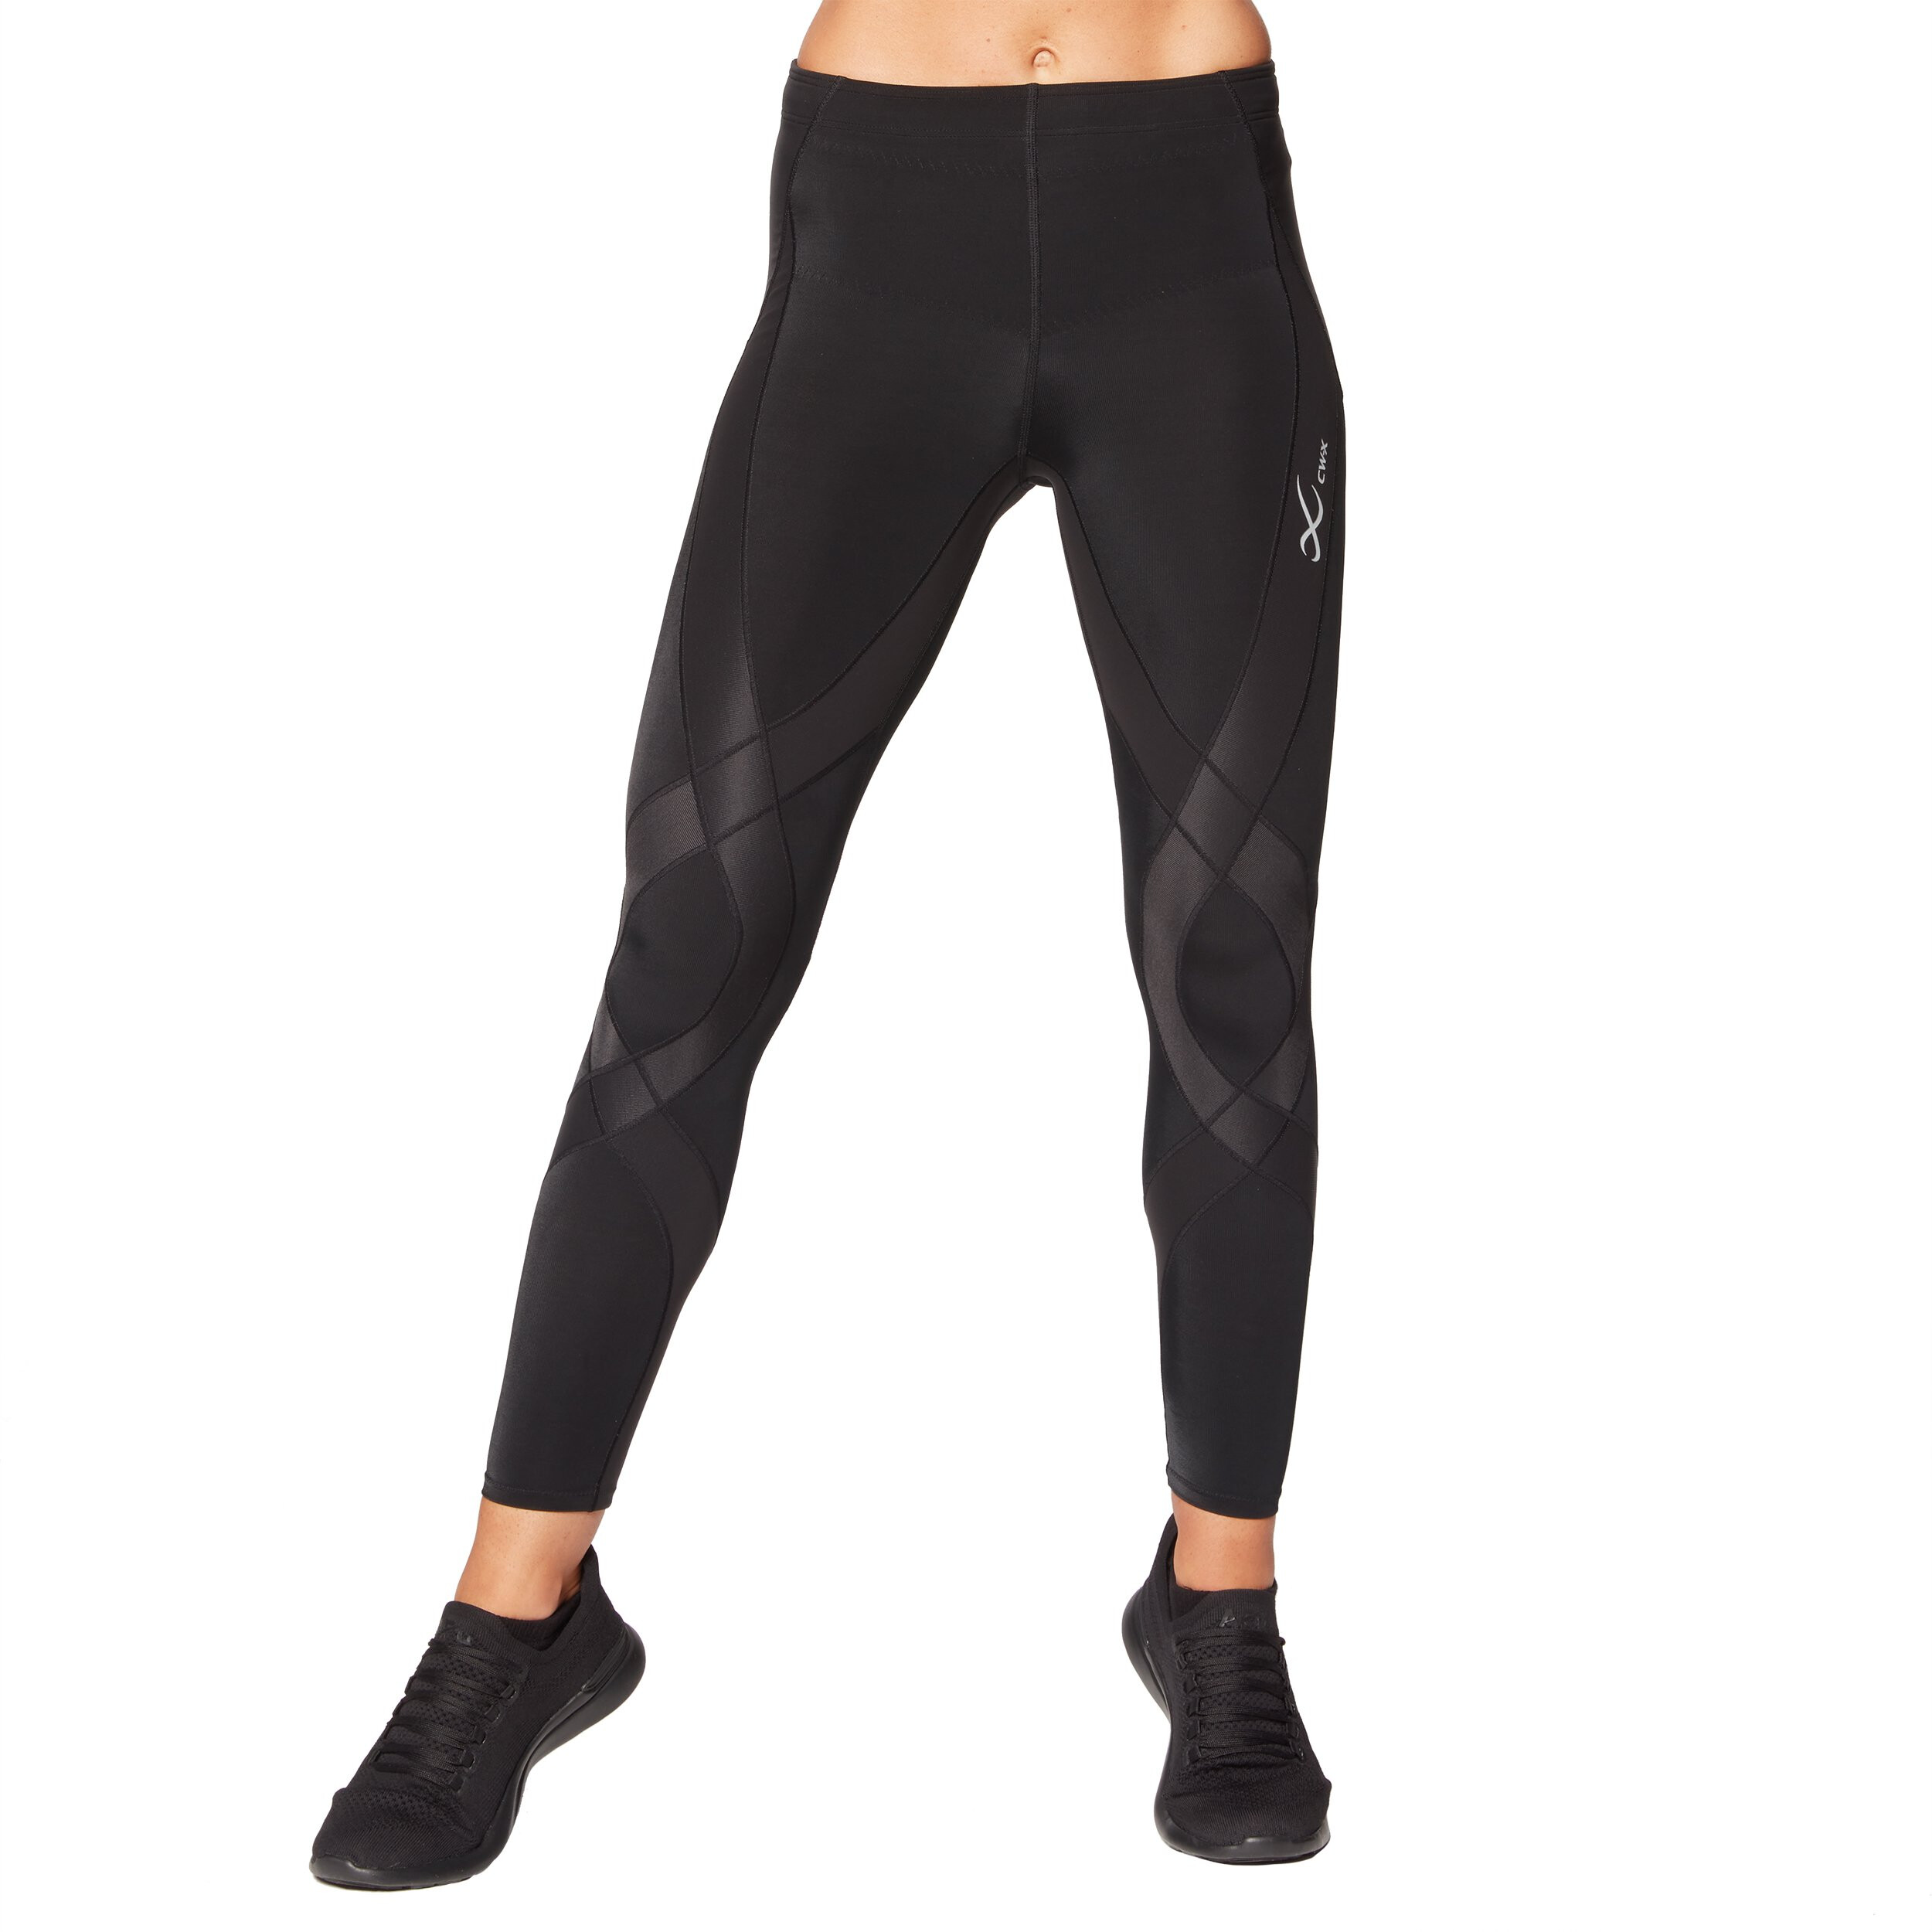 Imbracaminte Femei CW-X Endurance Generator Joint amp Muscle Support Compression Tights Jet Black